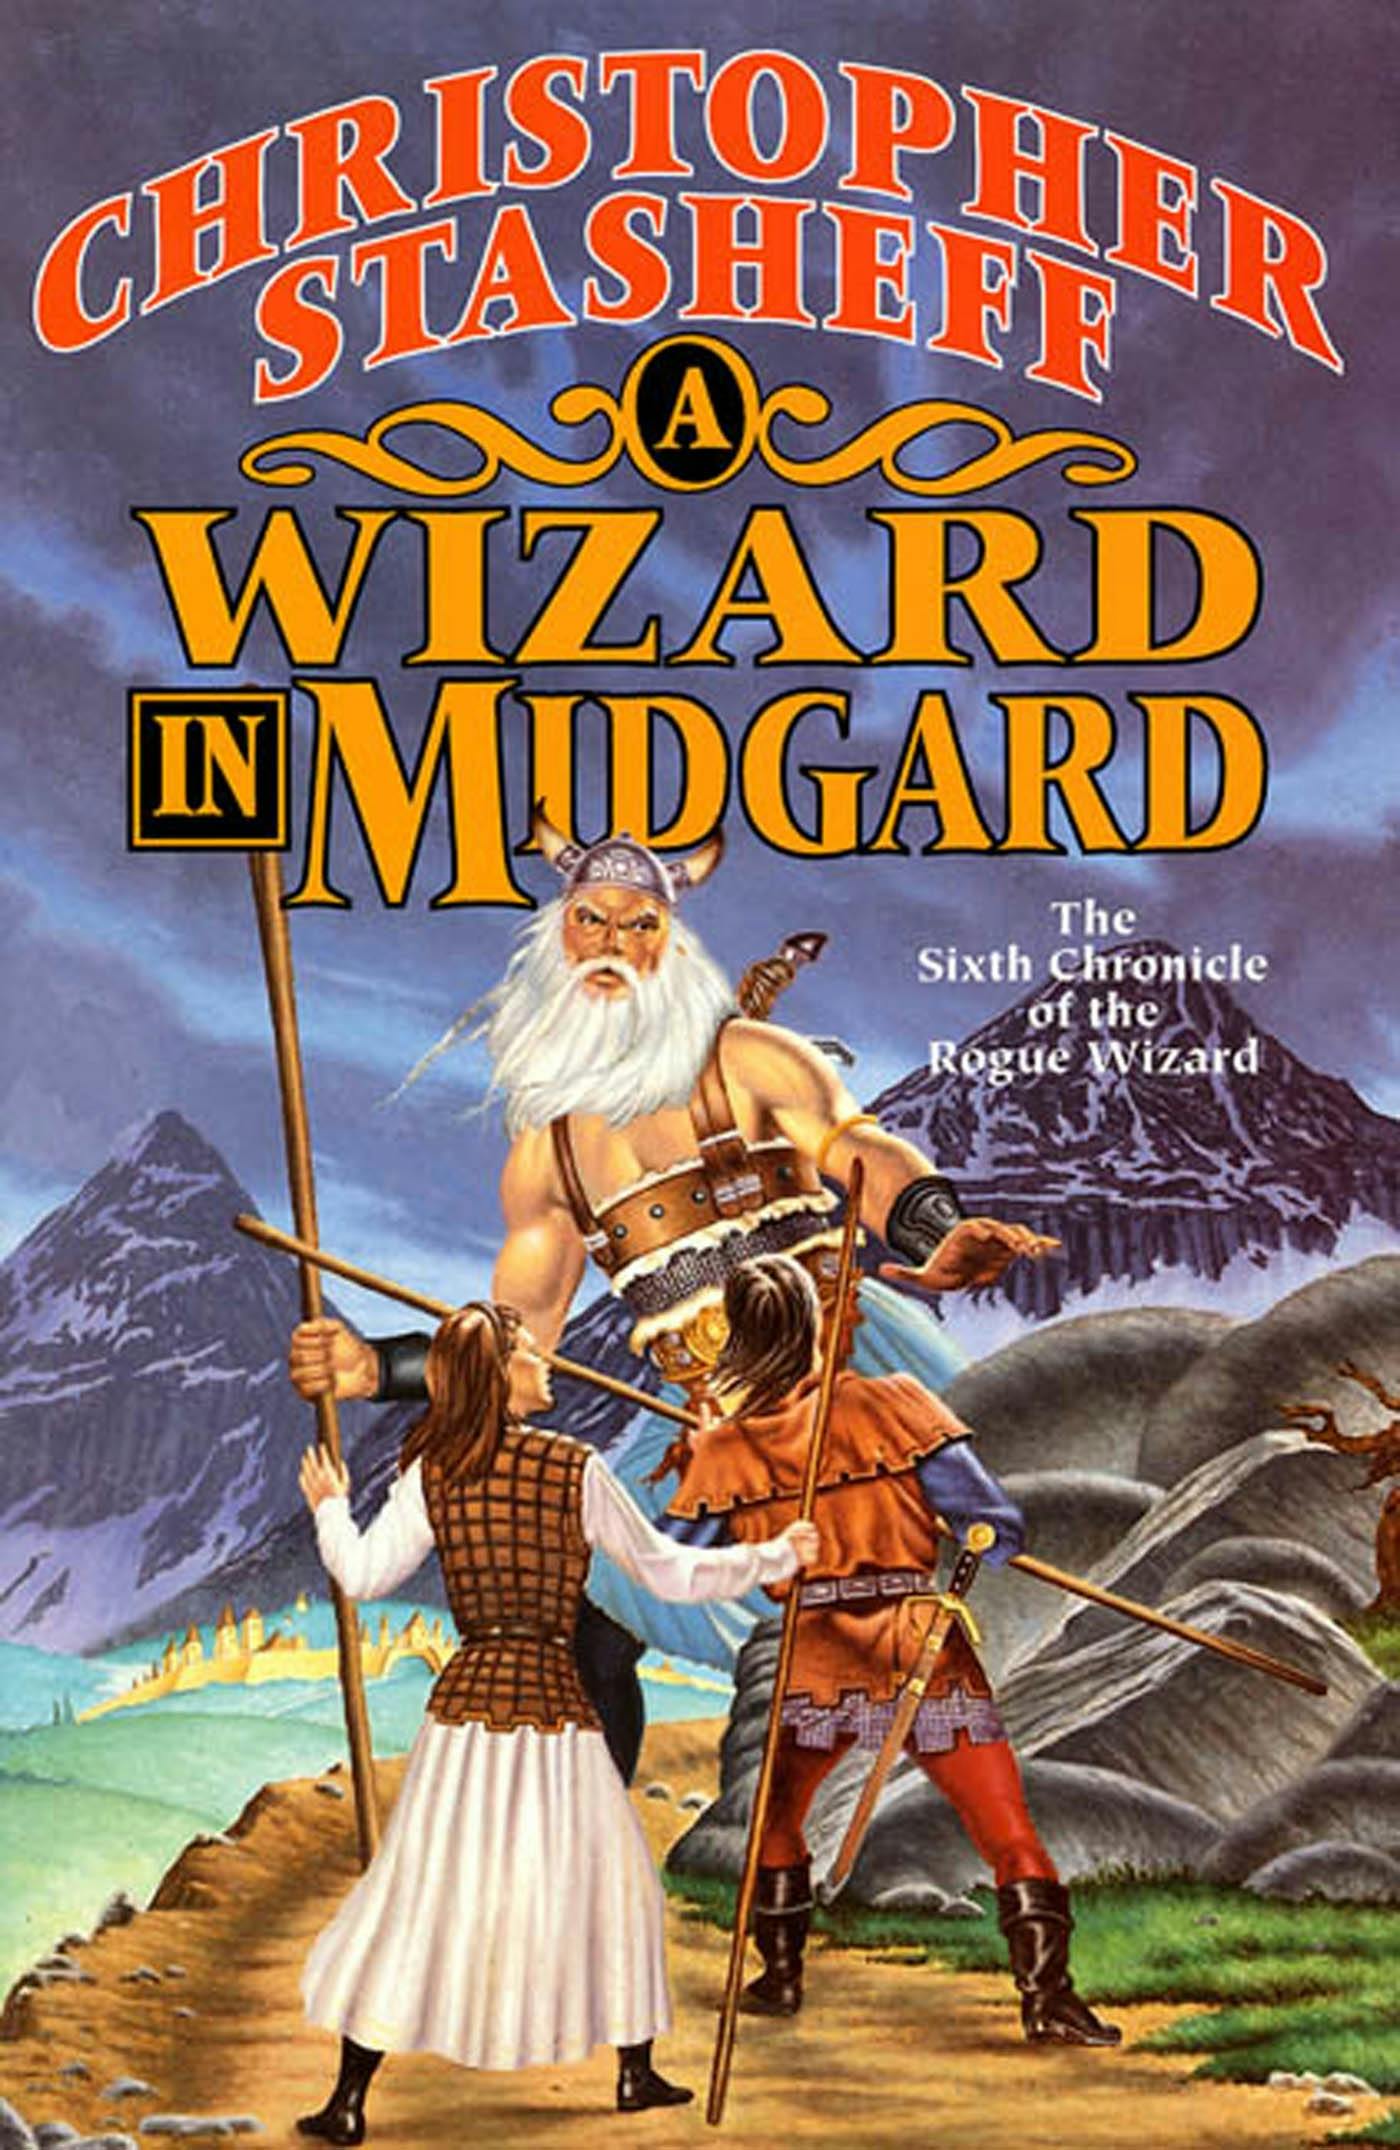 Cover for the book titled as: A Wizard In Midgard